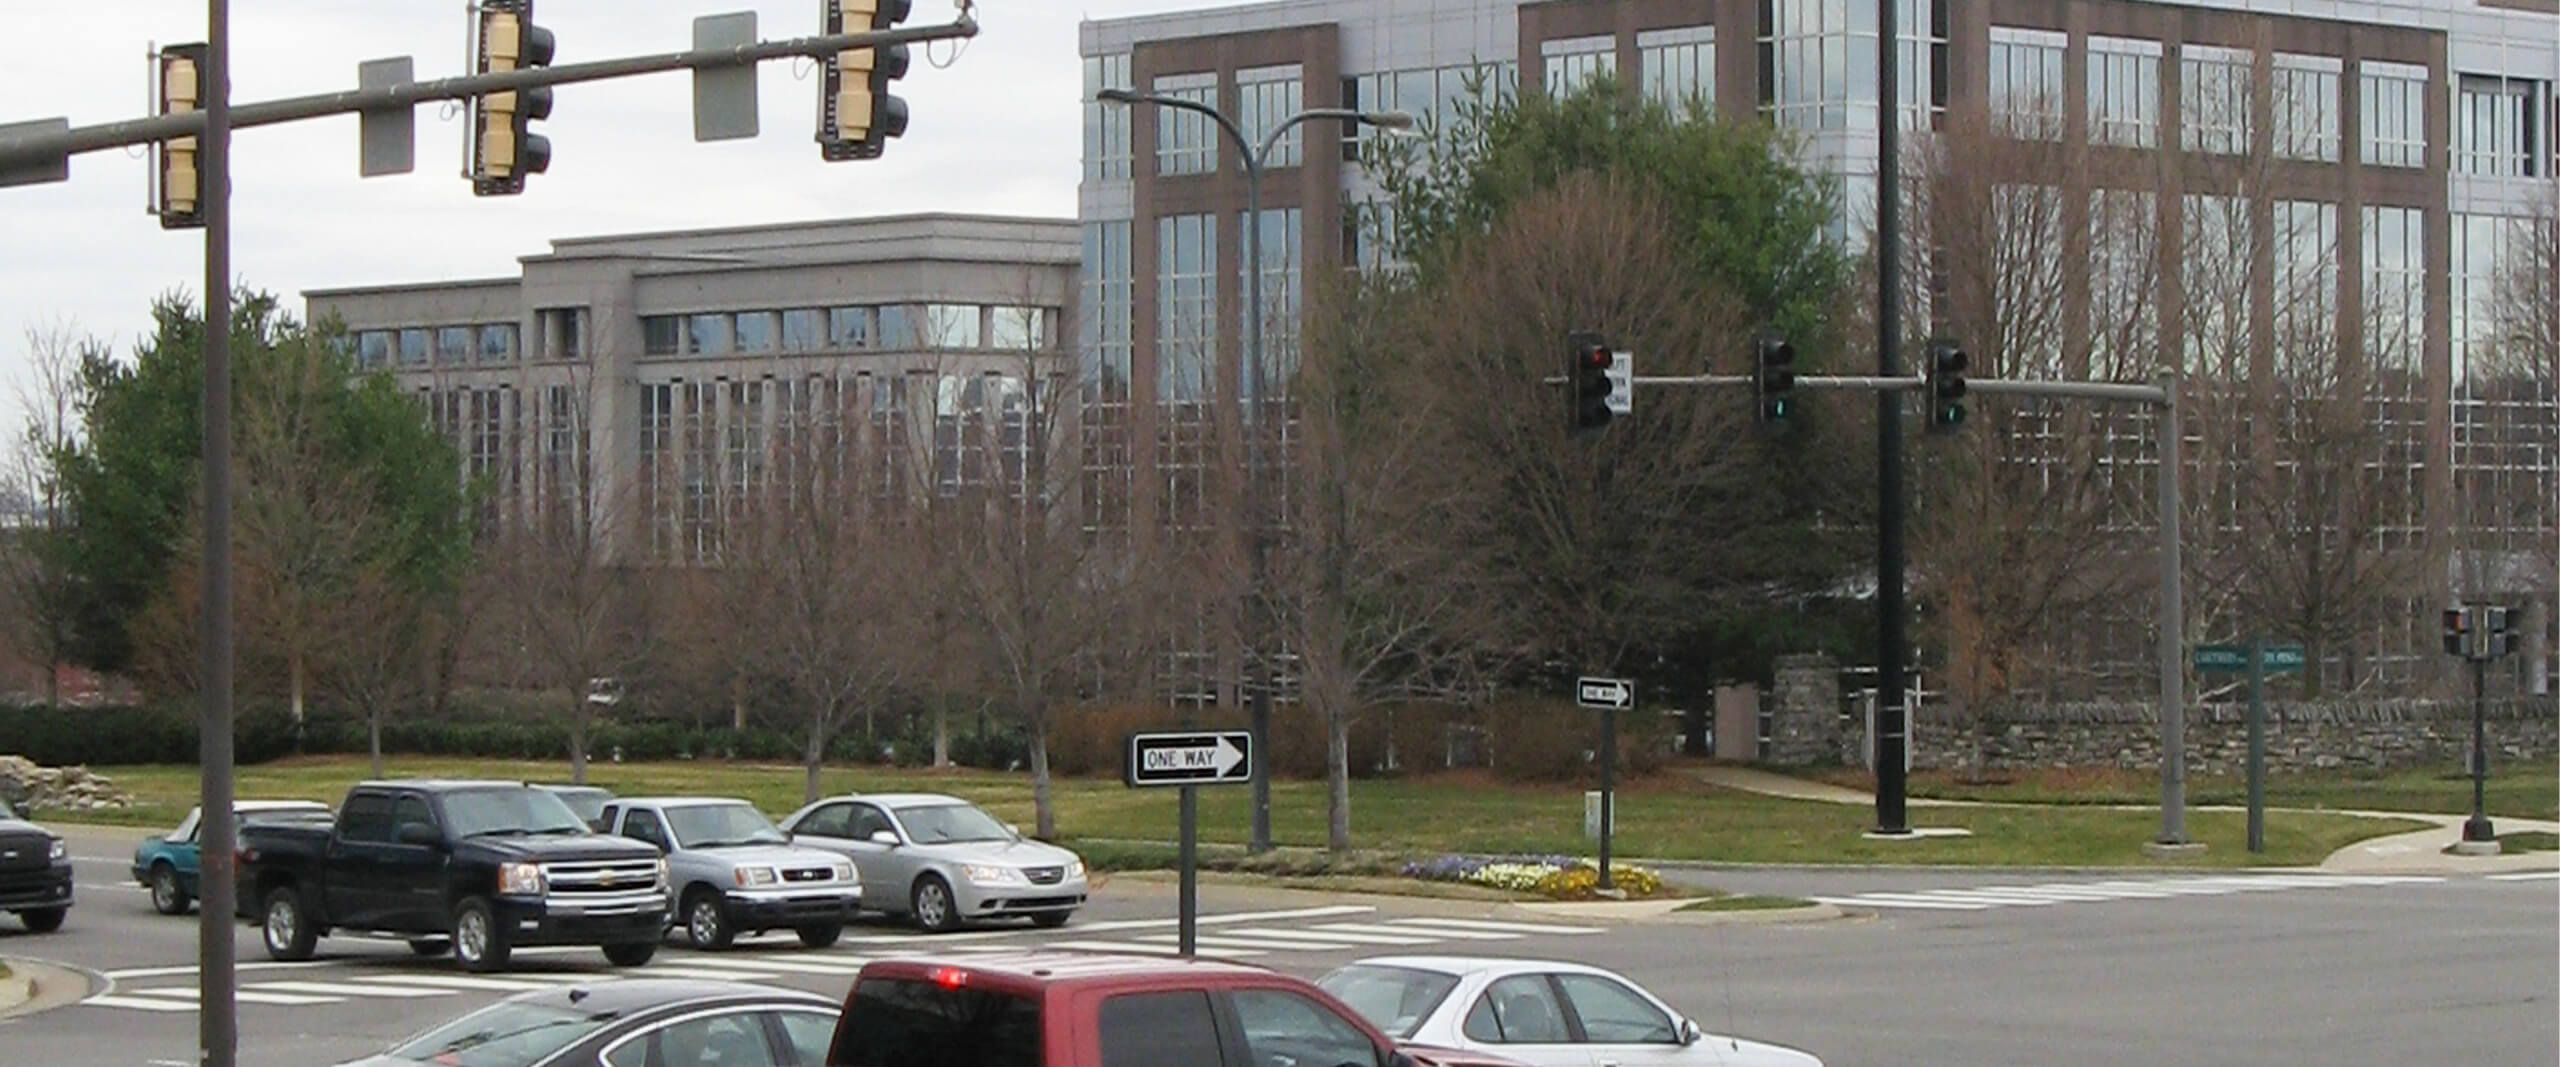 A traffic intersection in Cool Springs